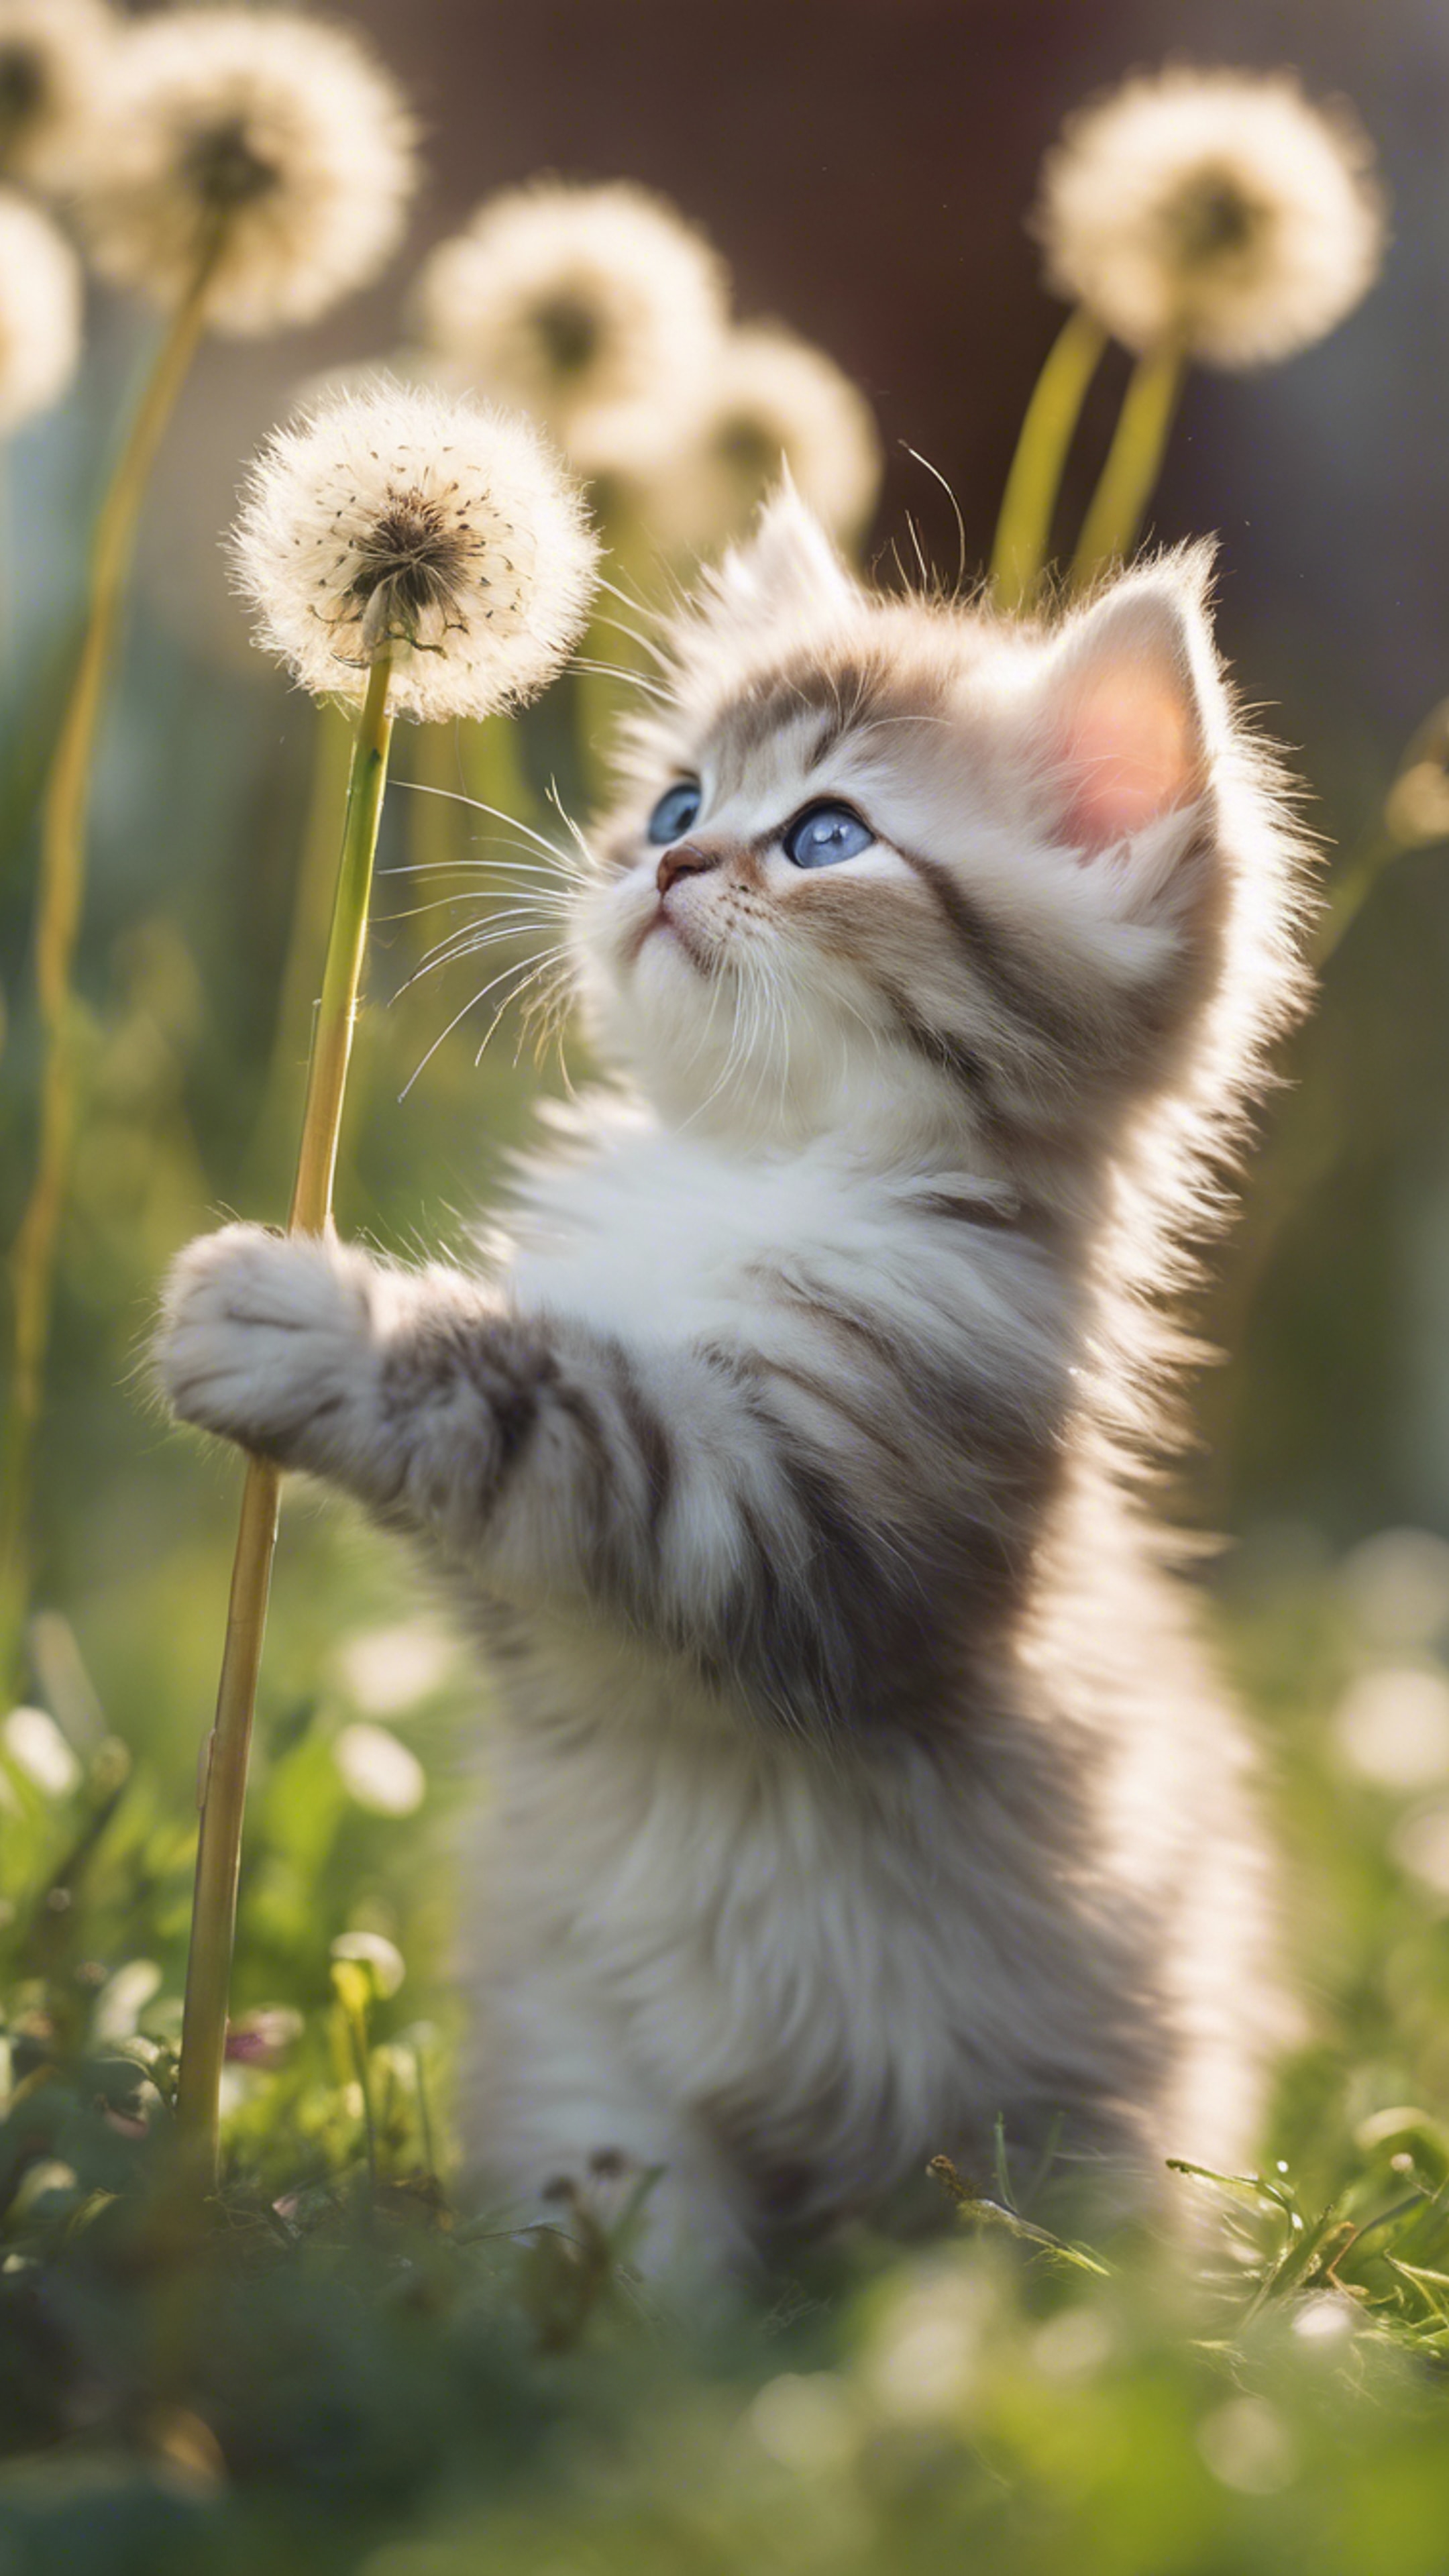 A curious Persian kitten playfully batting at a dandelishion puff in the midst of spring bloom. Валлпапер[a1f5779e66044a4f83a1]